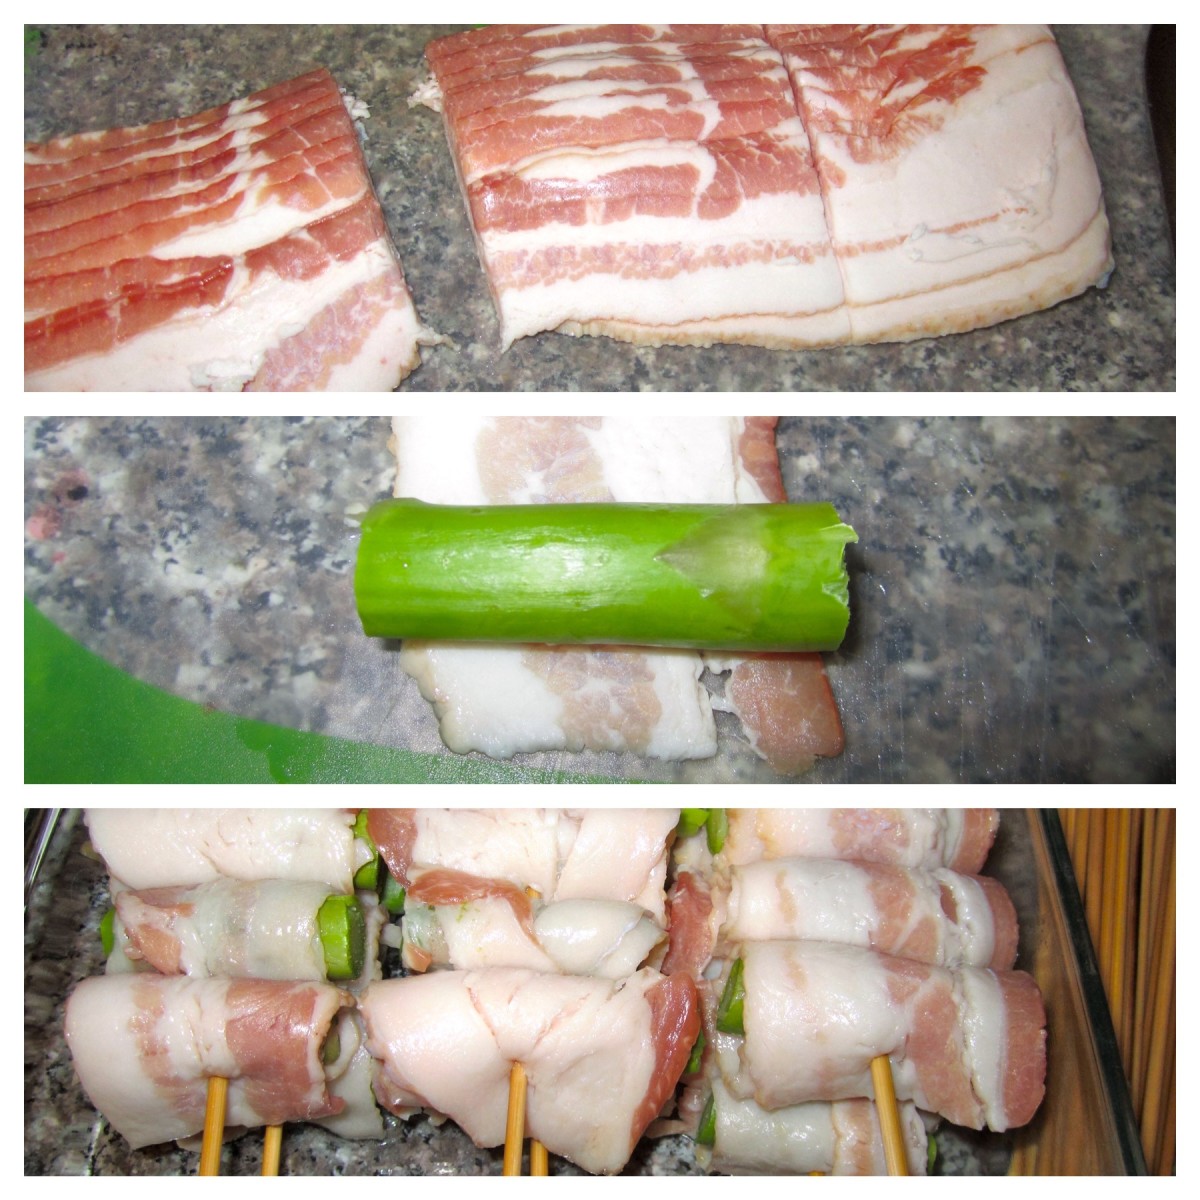 Top: Cut bacon (into thirds) that has been chilled in the freezer. Middle: One piece of asparagus that is being wrapped in one piece of cut bacon. Bottom: Skewers ready to be placed on the grill.